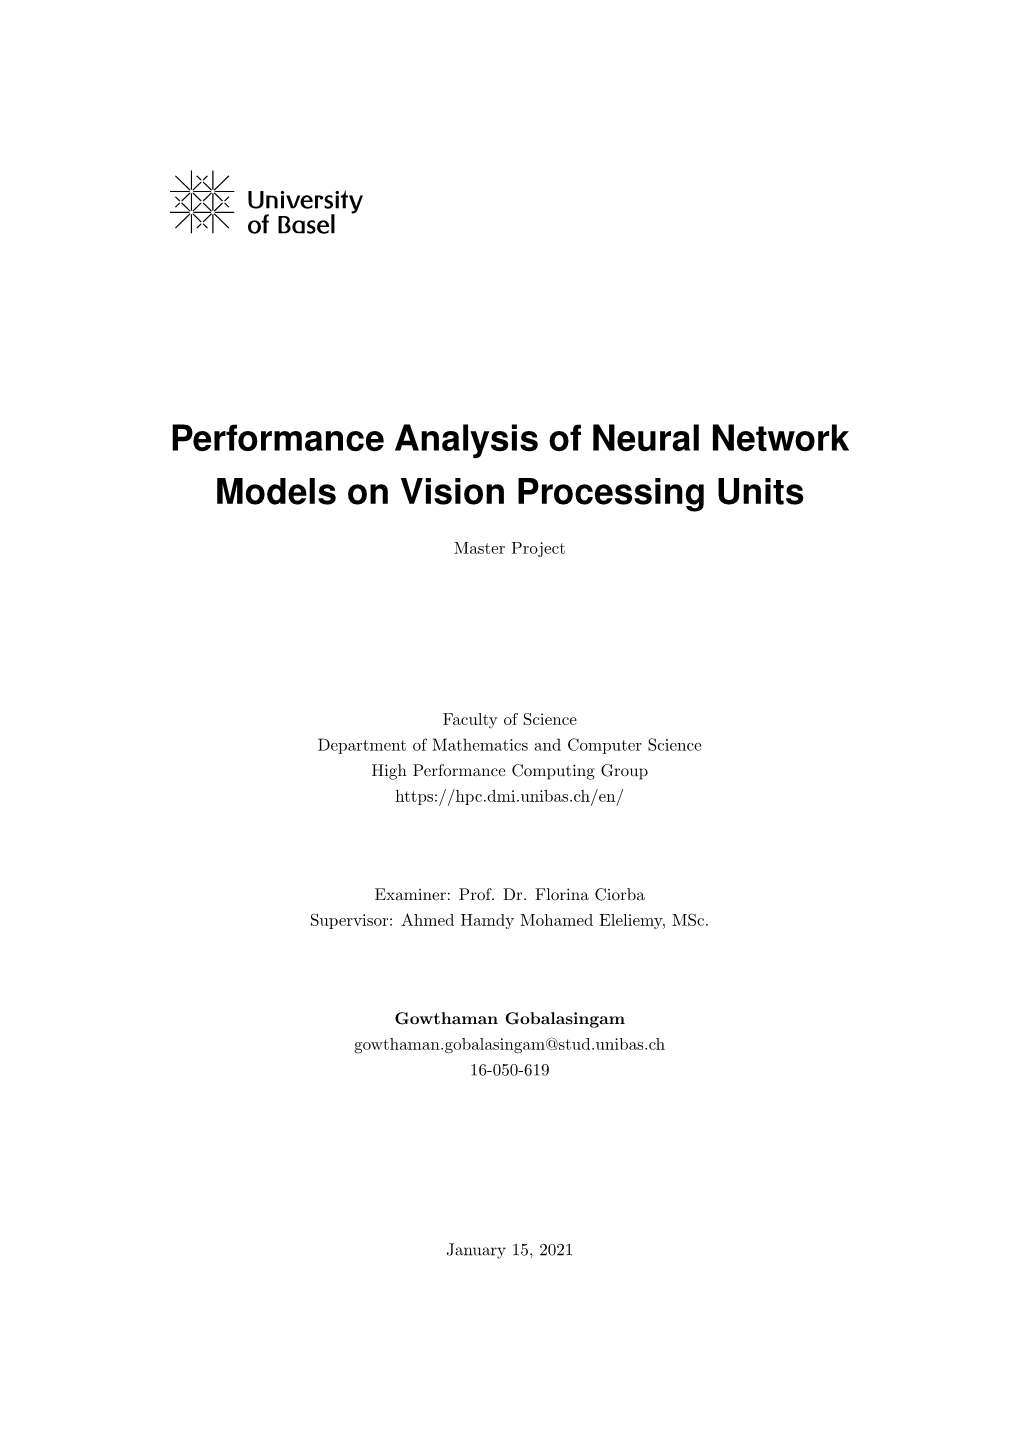 Performance Analysis of Neural Network Models on Vision Processing Units